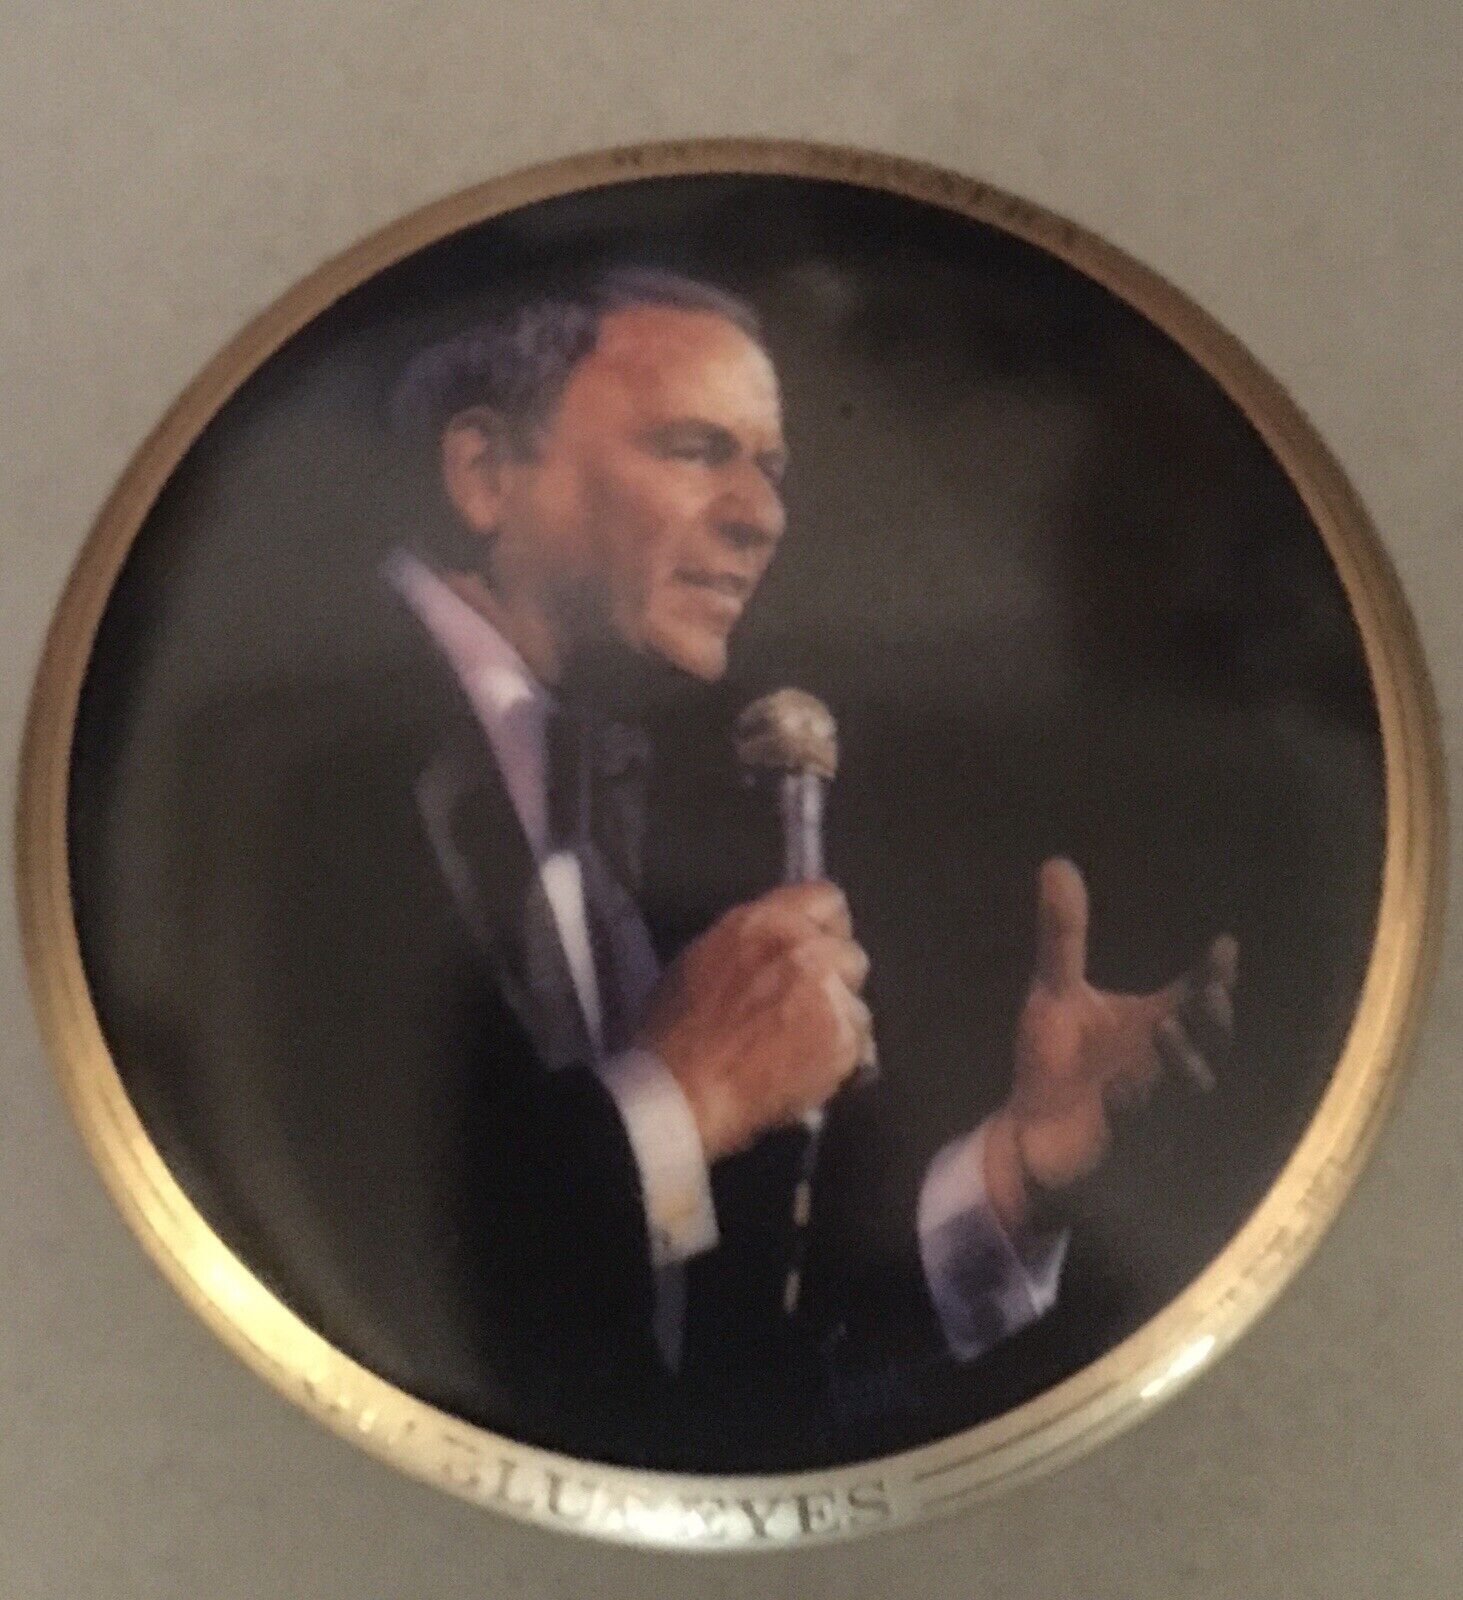 Frank Sinatra My Way Collectible Franklin Mint, Limited Edition Music Box